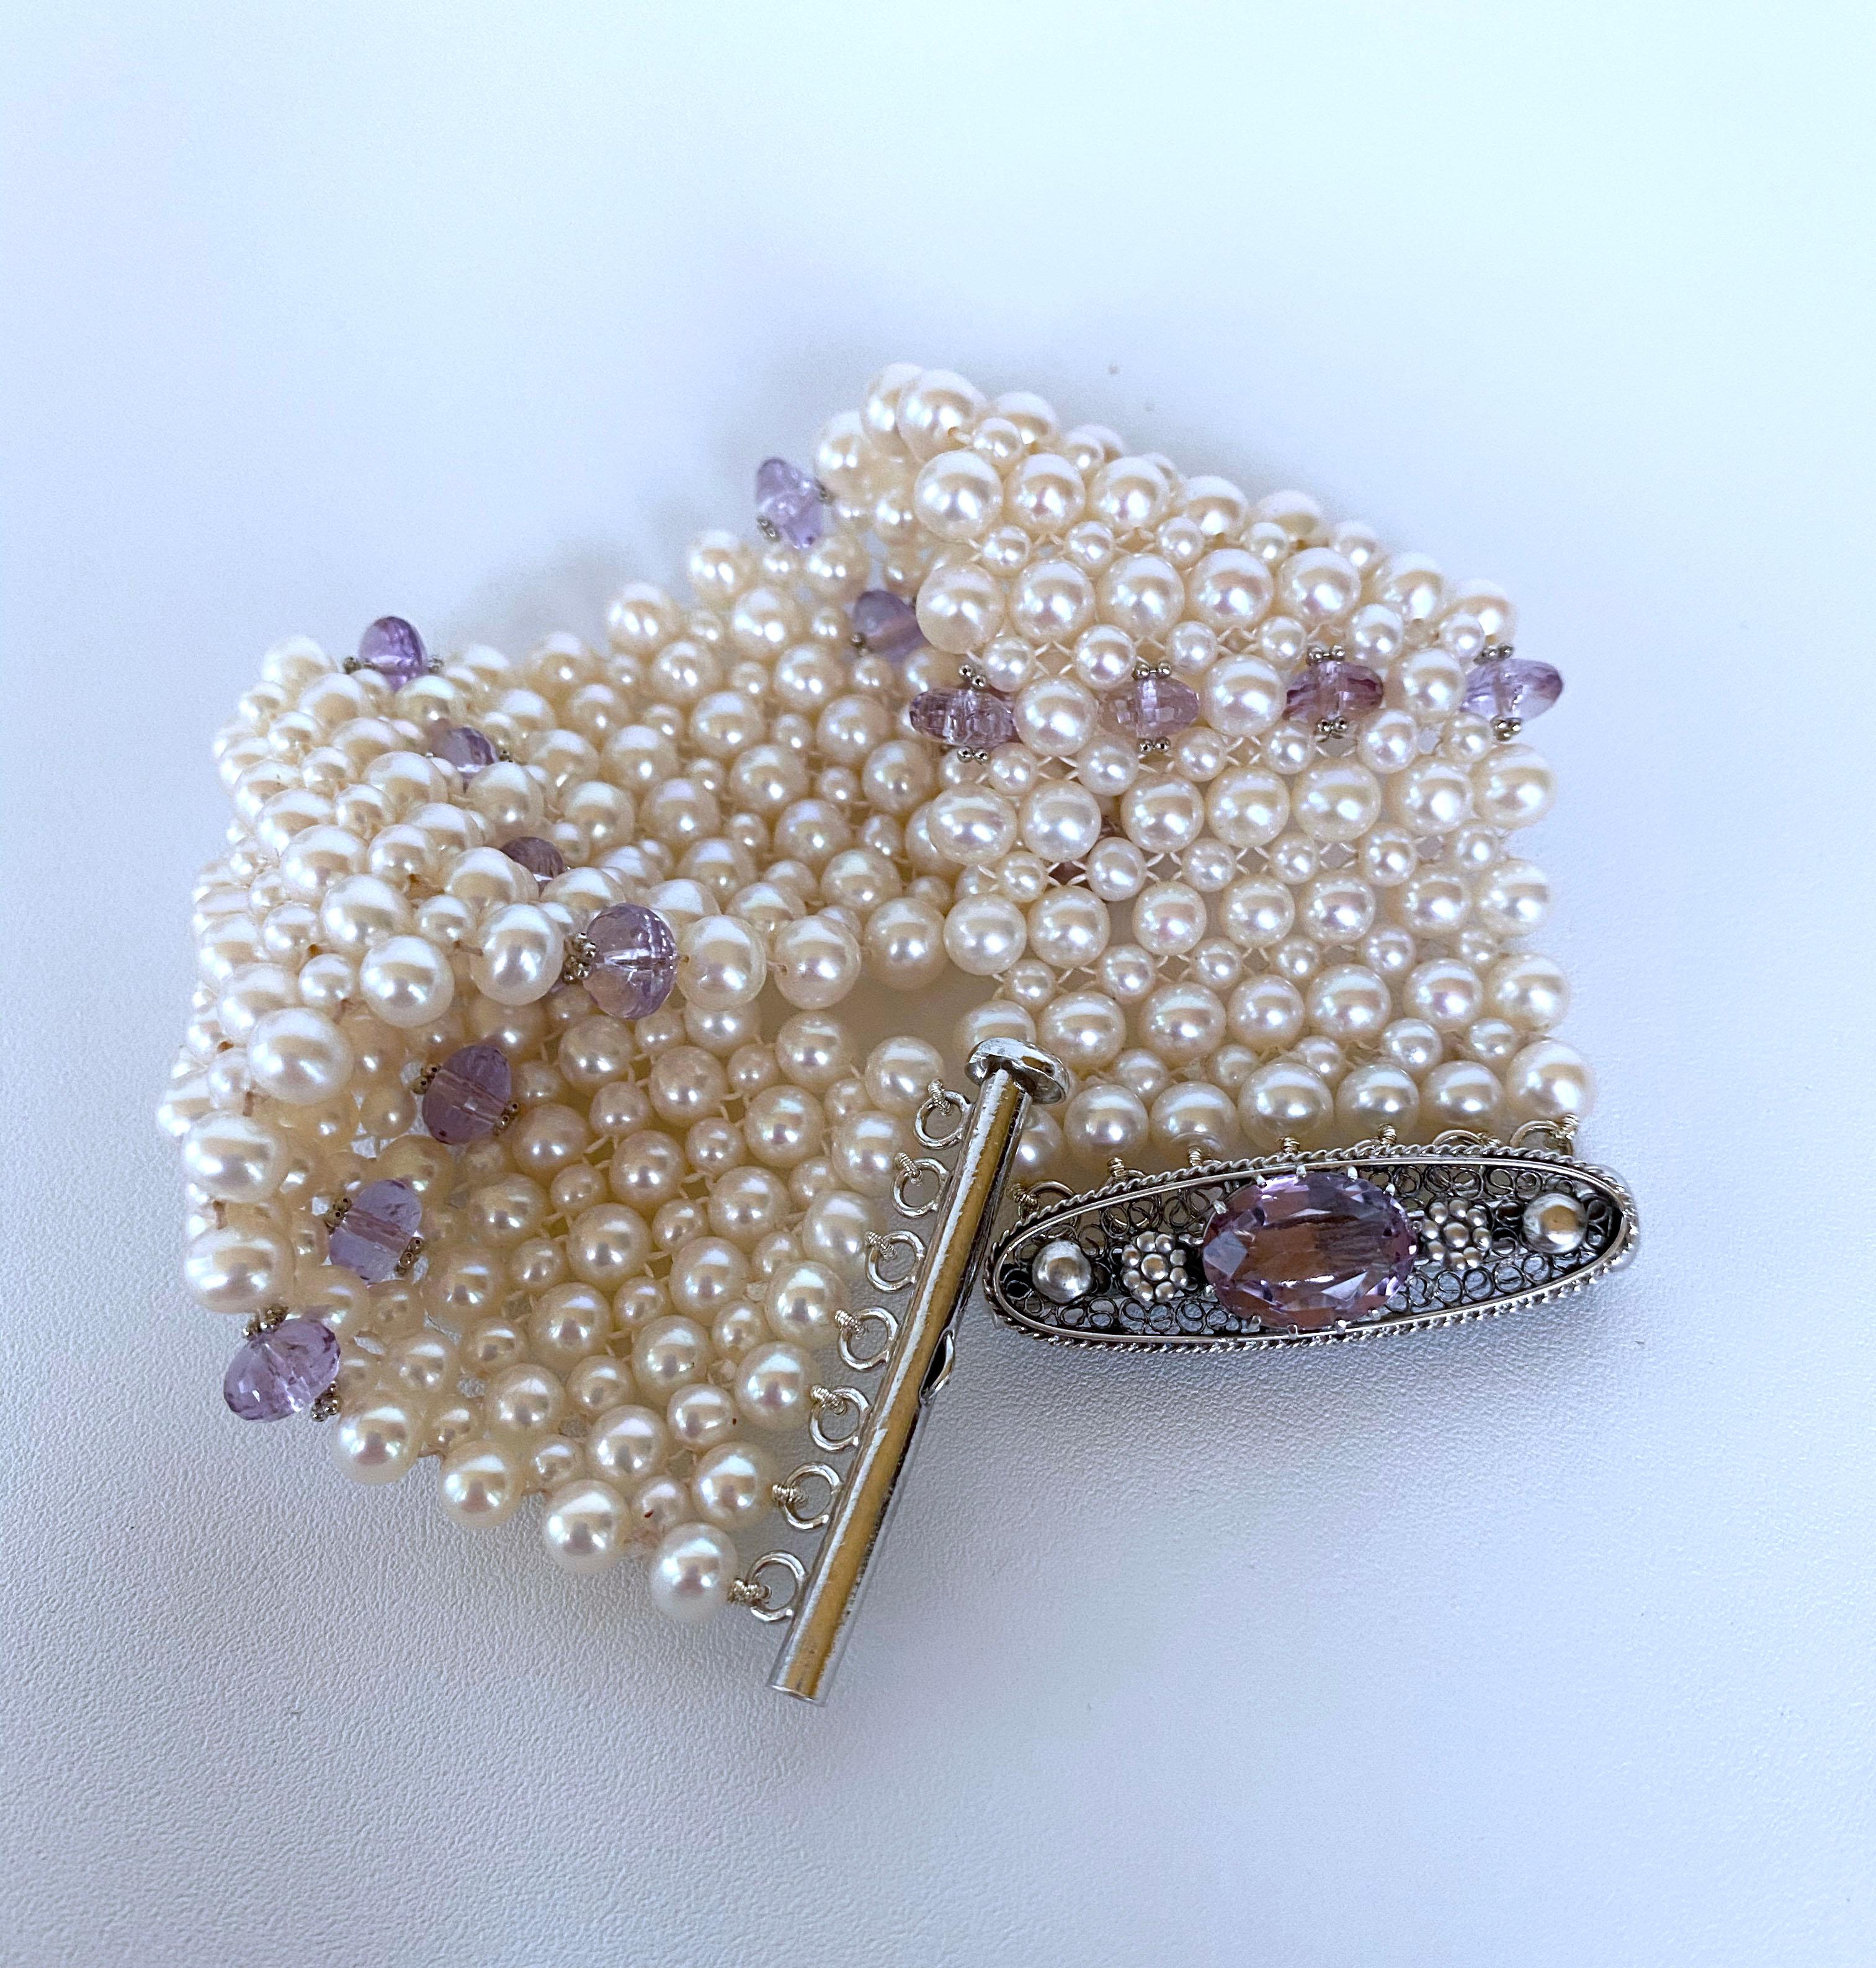 Marina J. Amethyst and Pearl Bracelet with Vintage Centerpiece Clasp and Rhodium For Sale 3